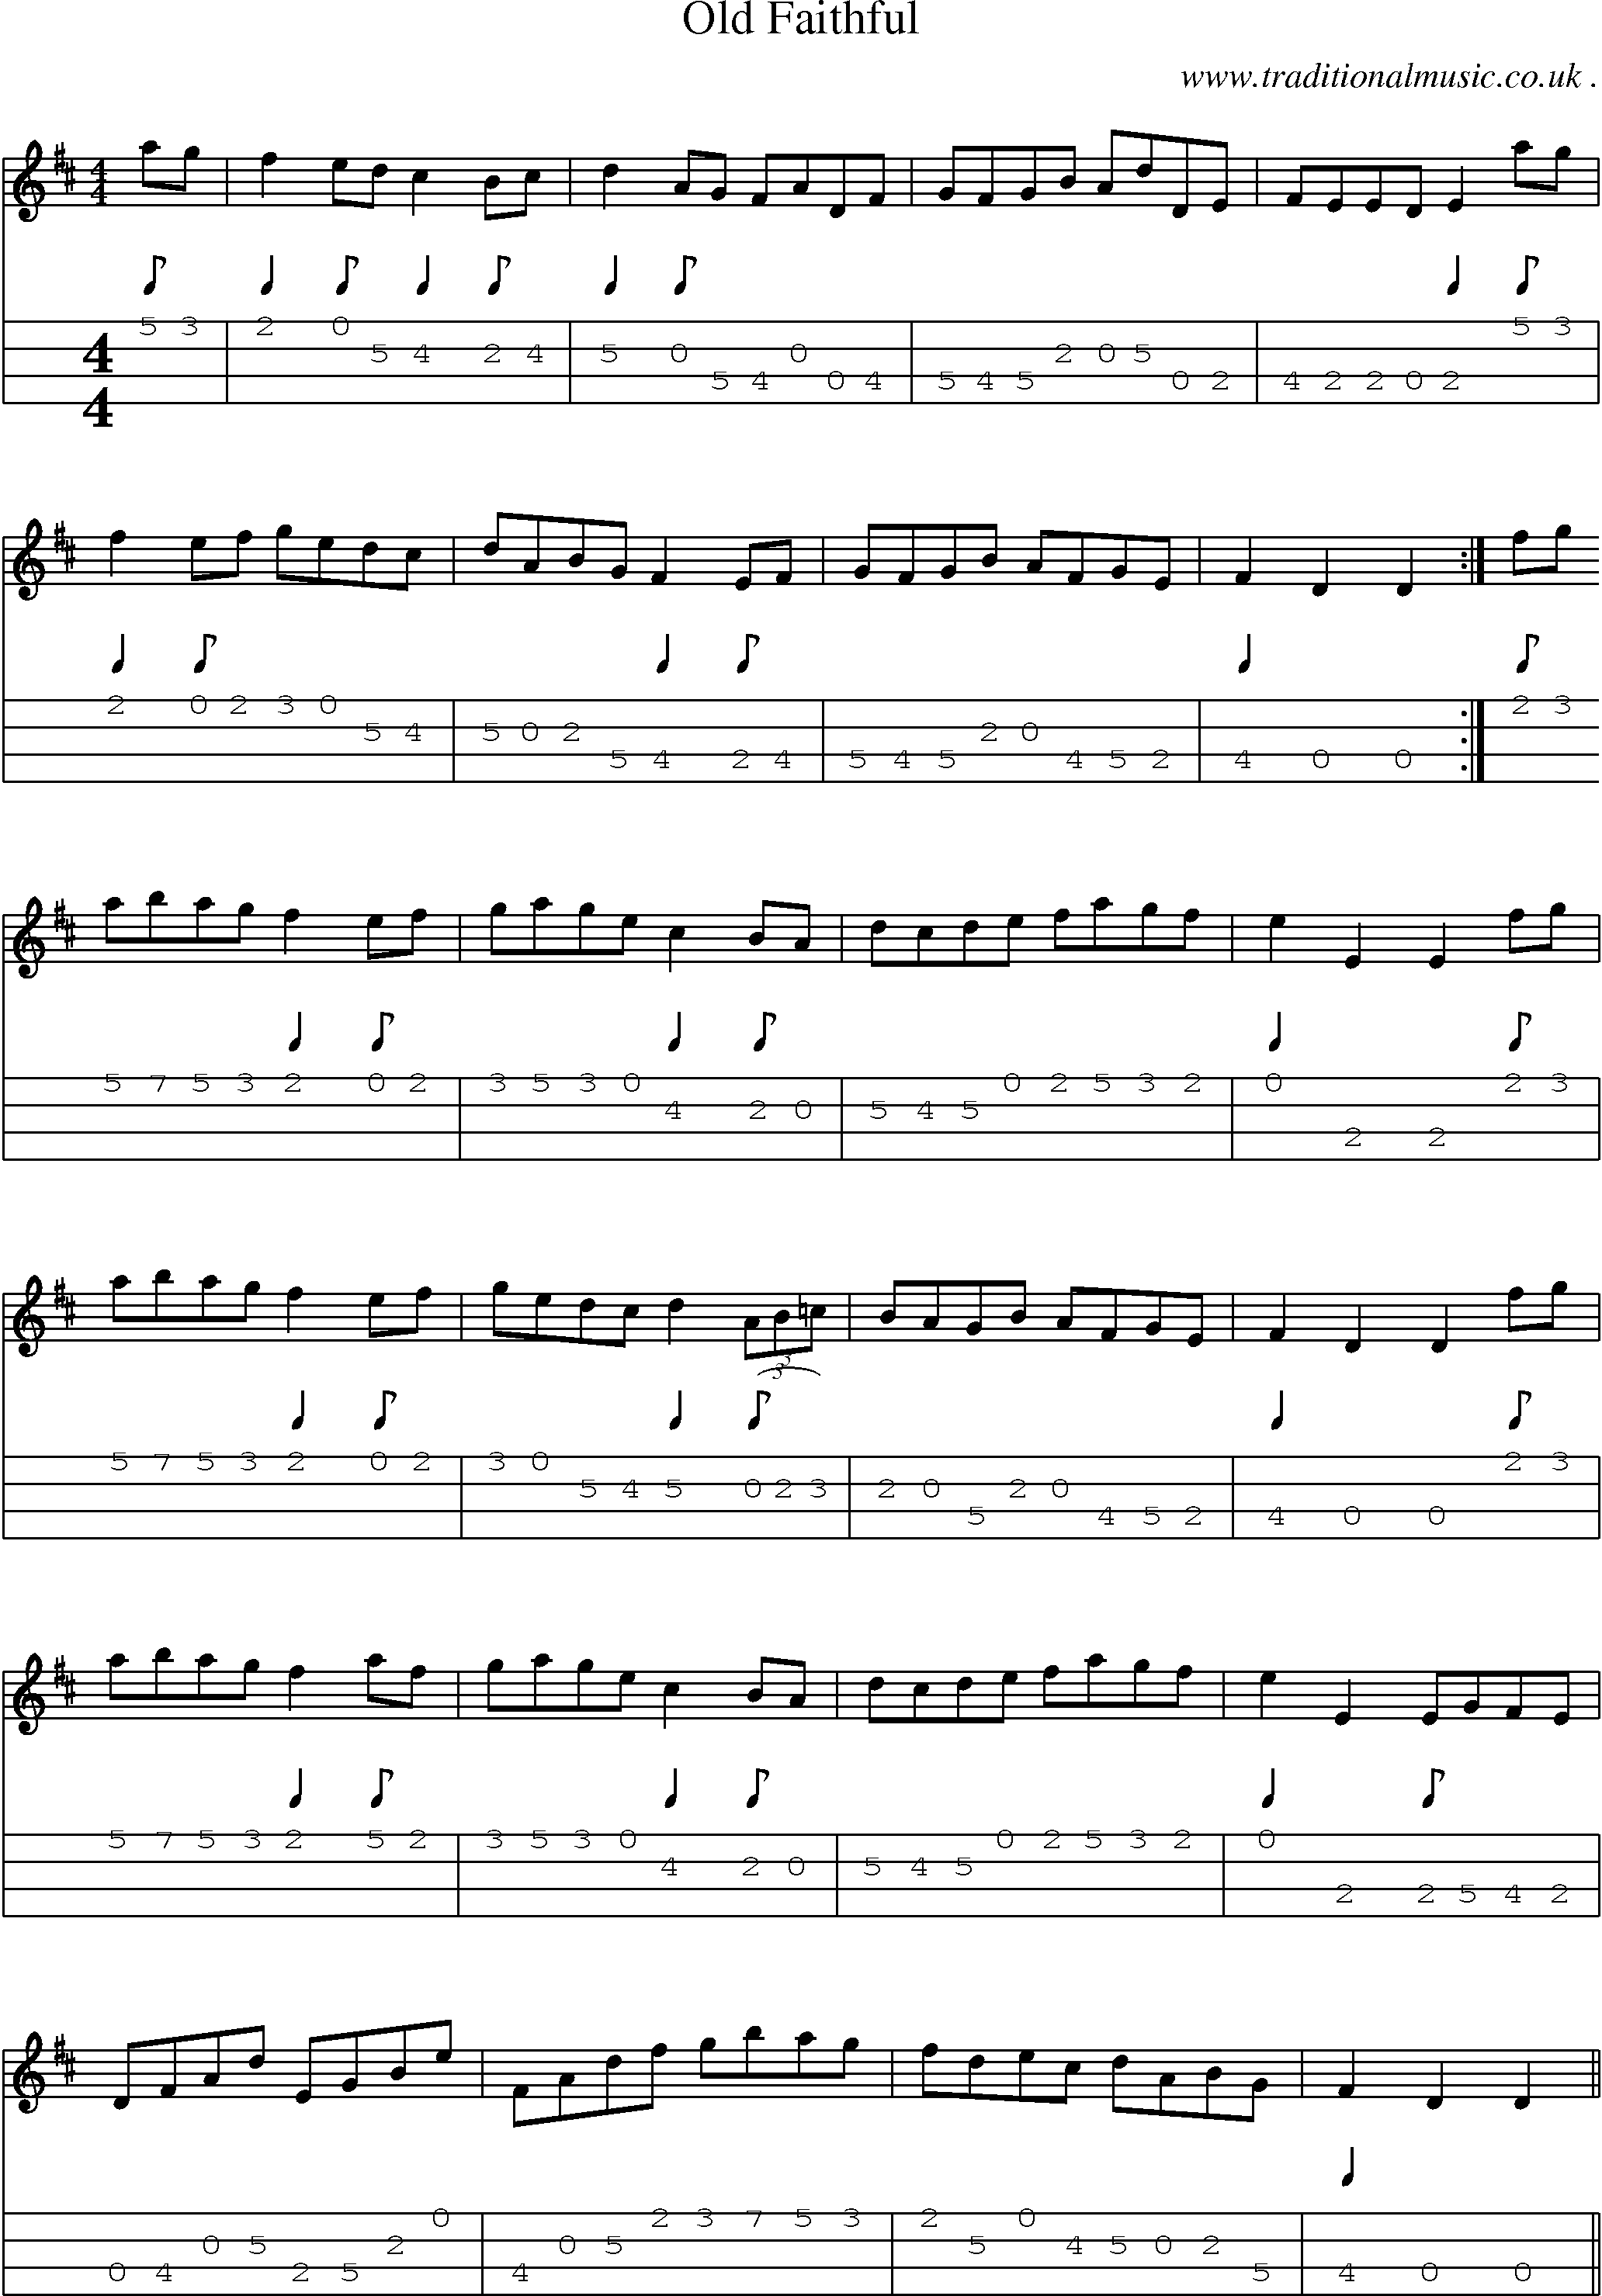 Sheet-music  score, Chords and Mandolin Tabs for Old Faithful